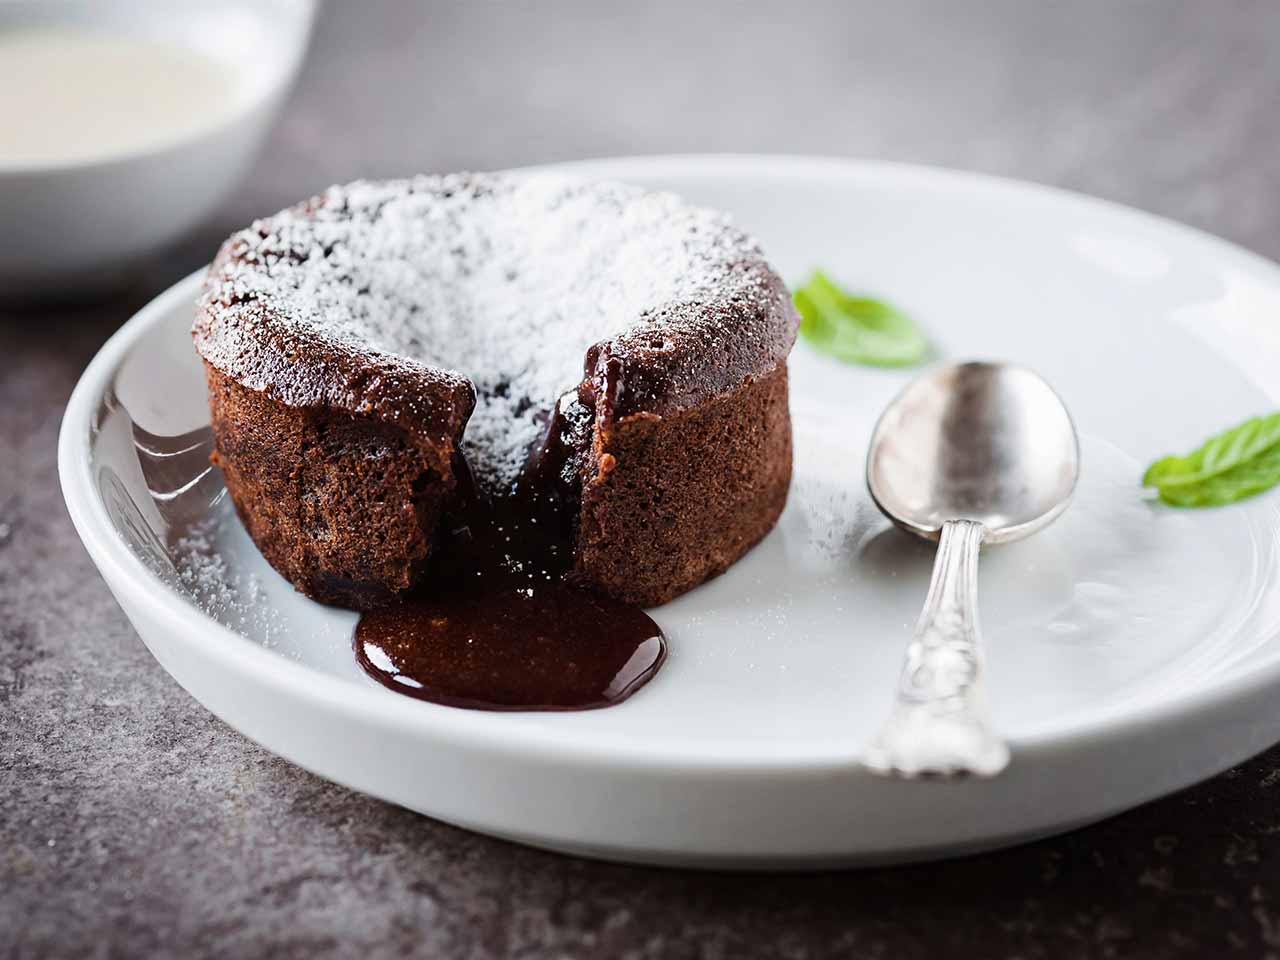 Chestnut and chocolate souffle 